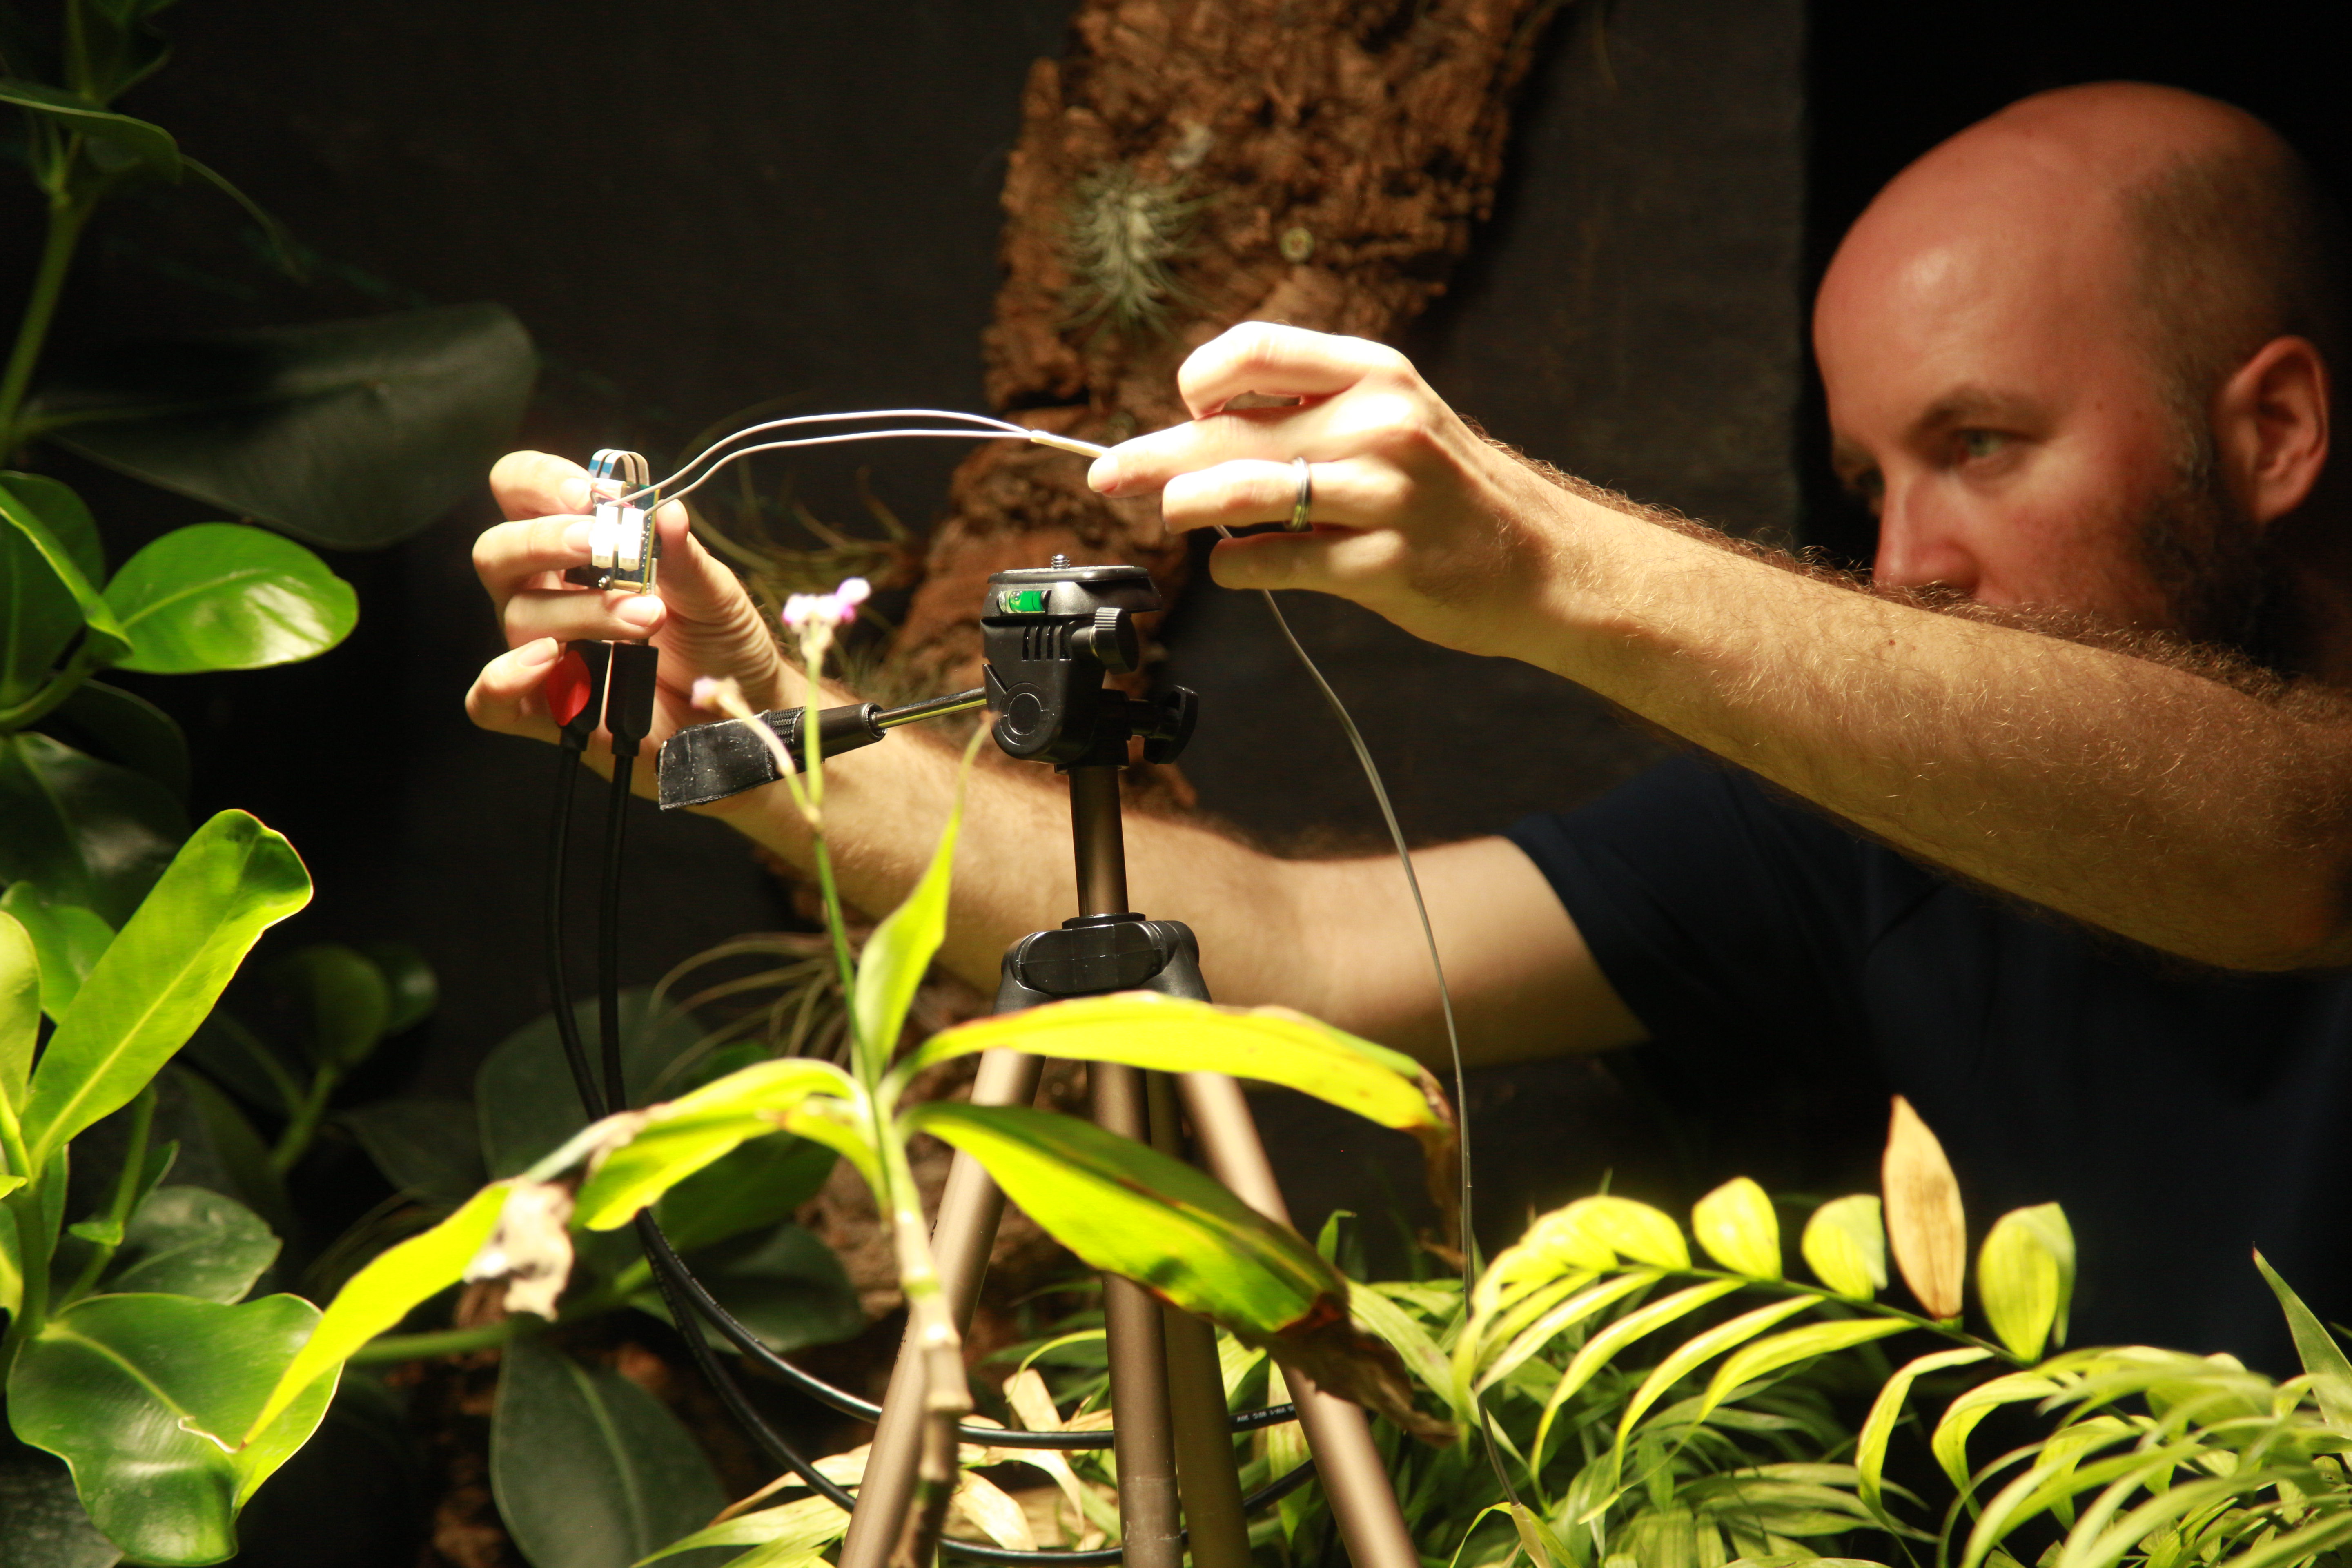 Worlds First Plant-Powered Camera Takes Worlds First Plant-Powered Selfie